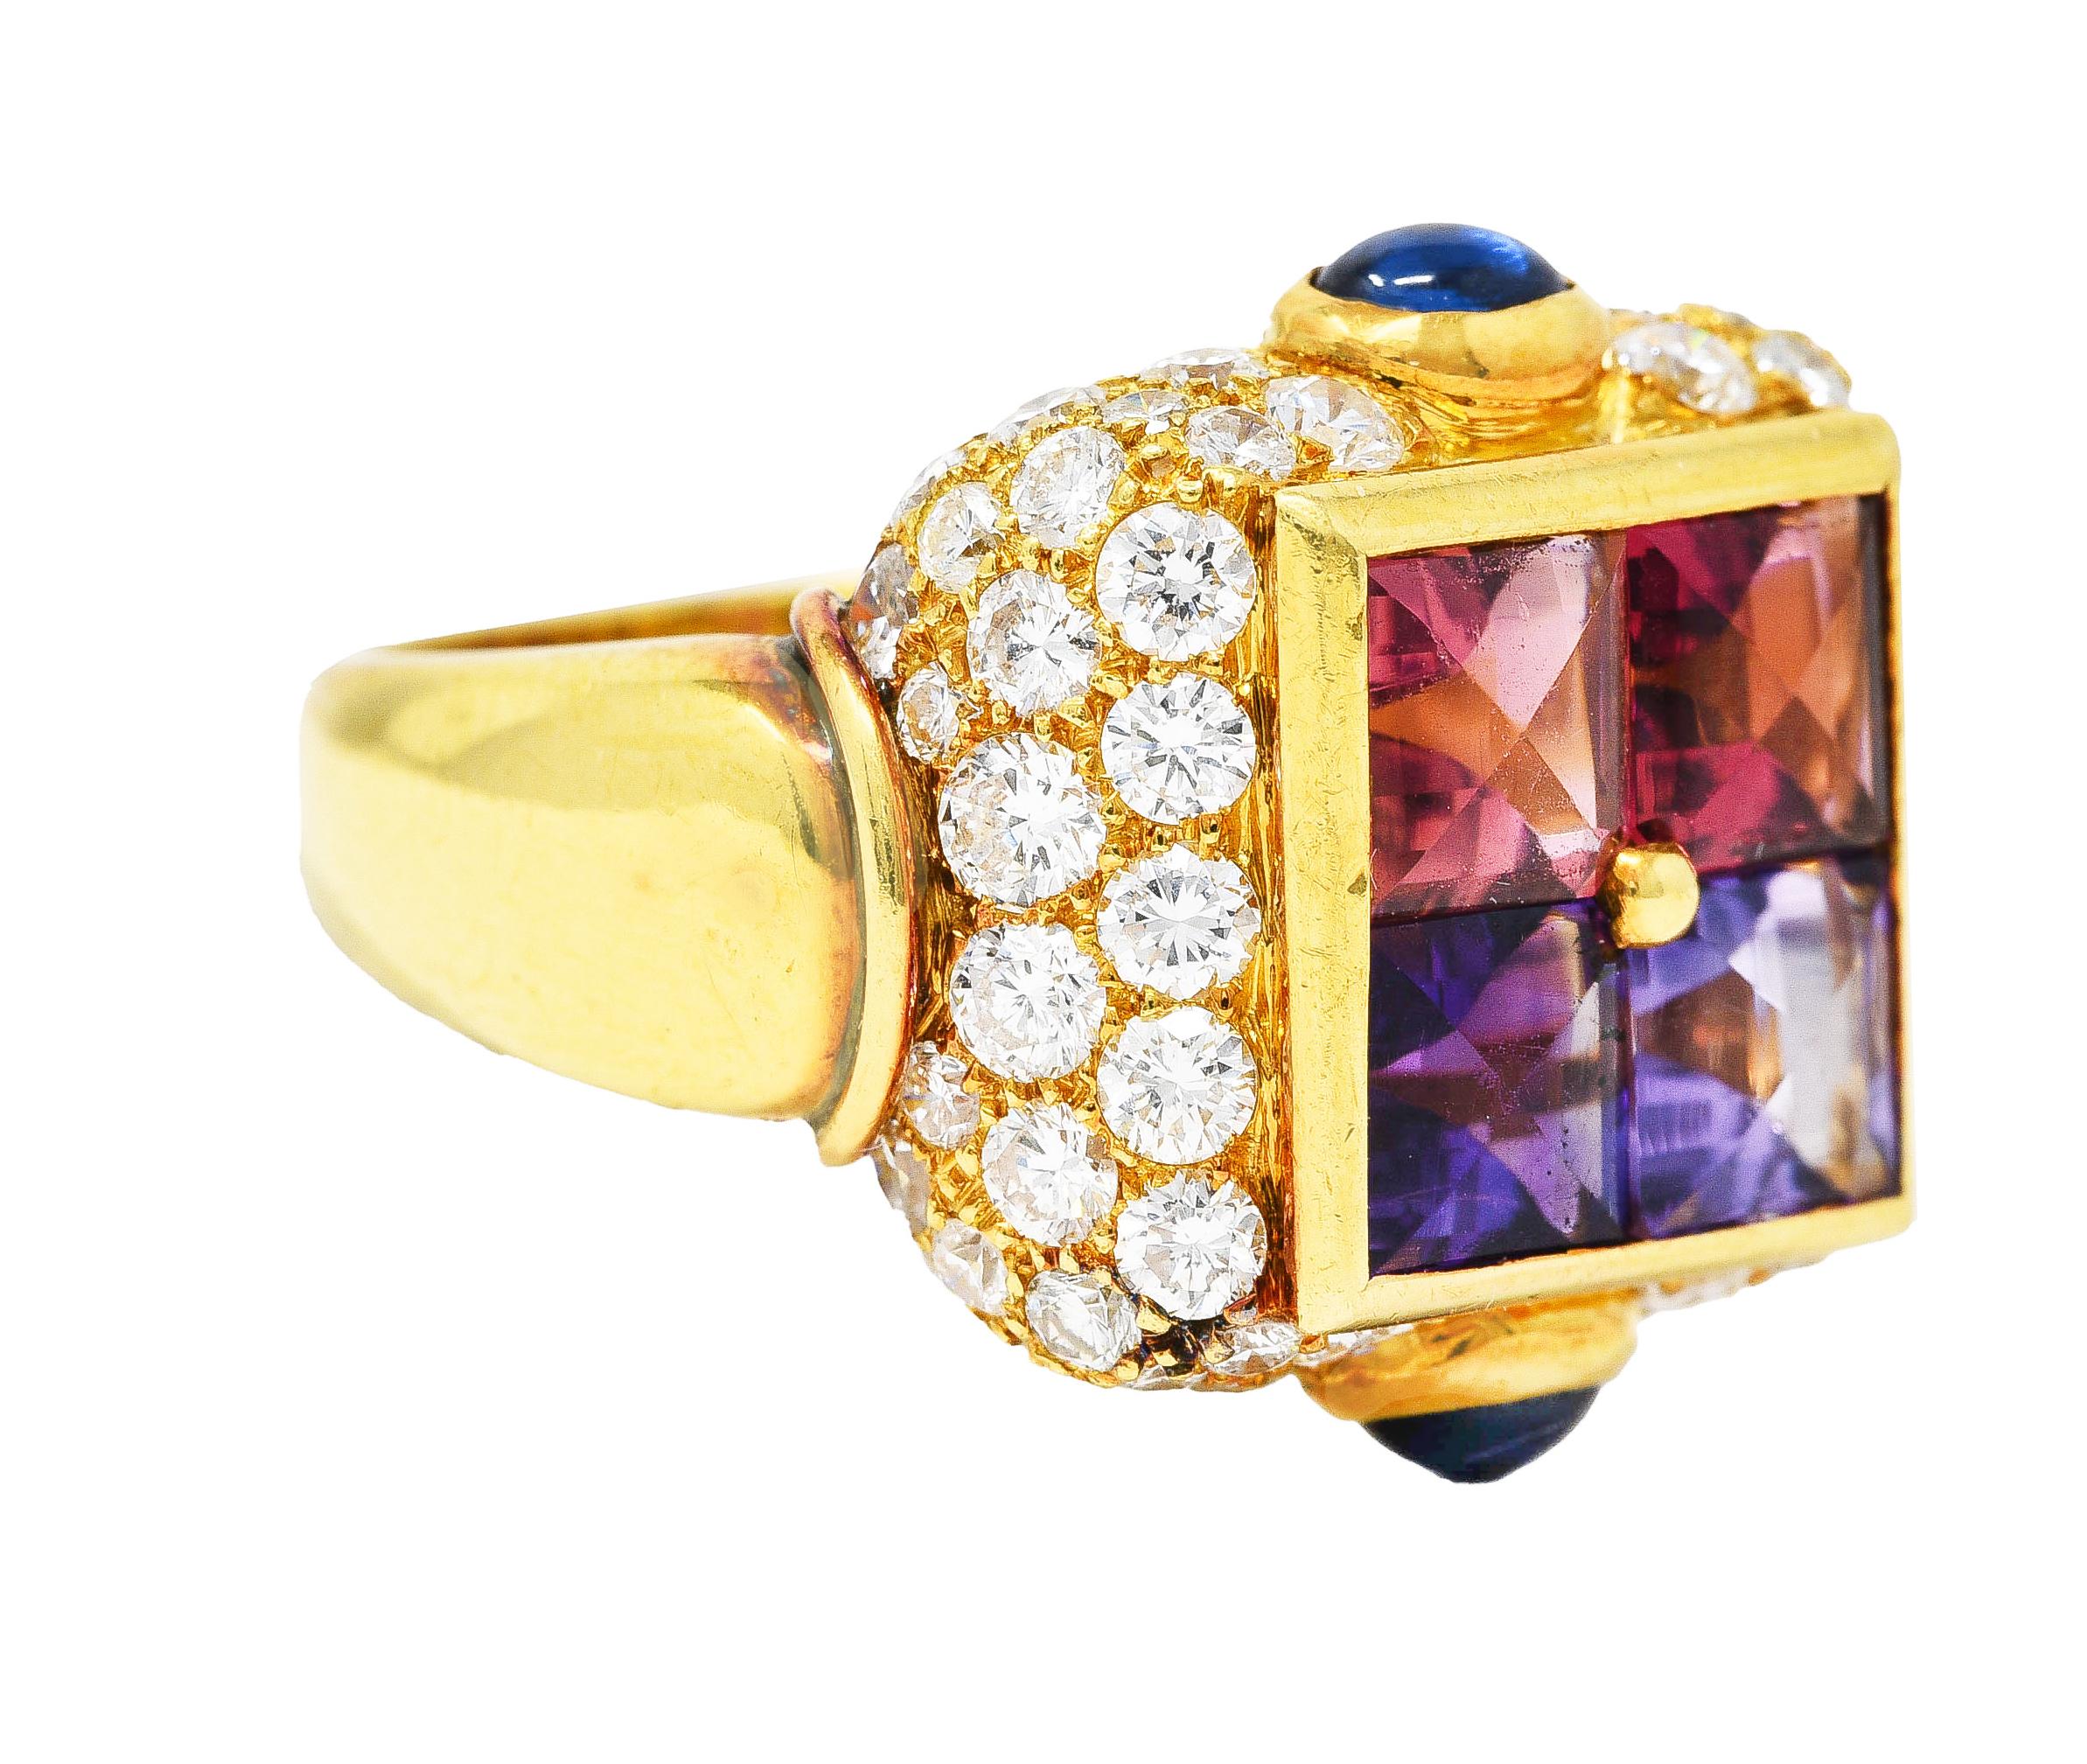 Ring features a stylized mystery setting of 5.0 mm buff top square cut gemstones. Featuring lavender topaz, purple amethyst, and pink tourmalines. In a polished gold frame and surrounded by a cushion form with pavé set round brilliant cut diamonds.